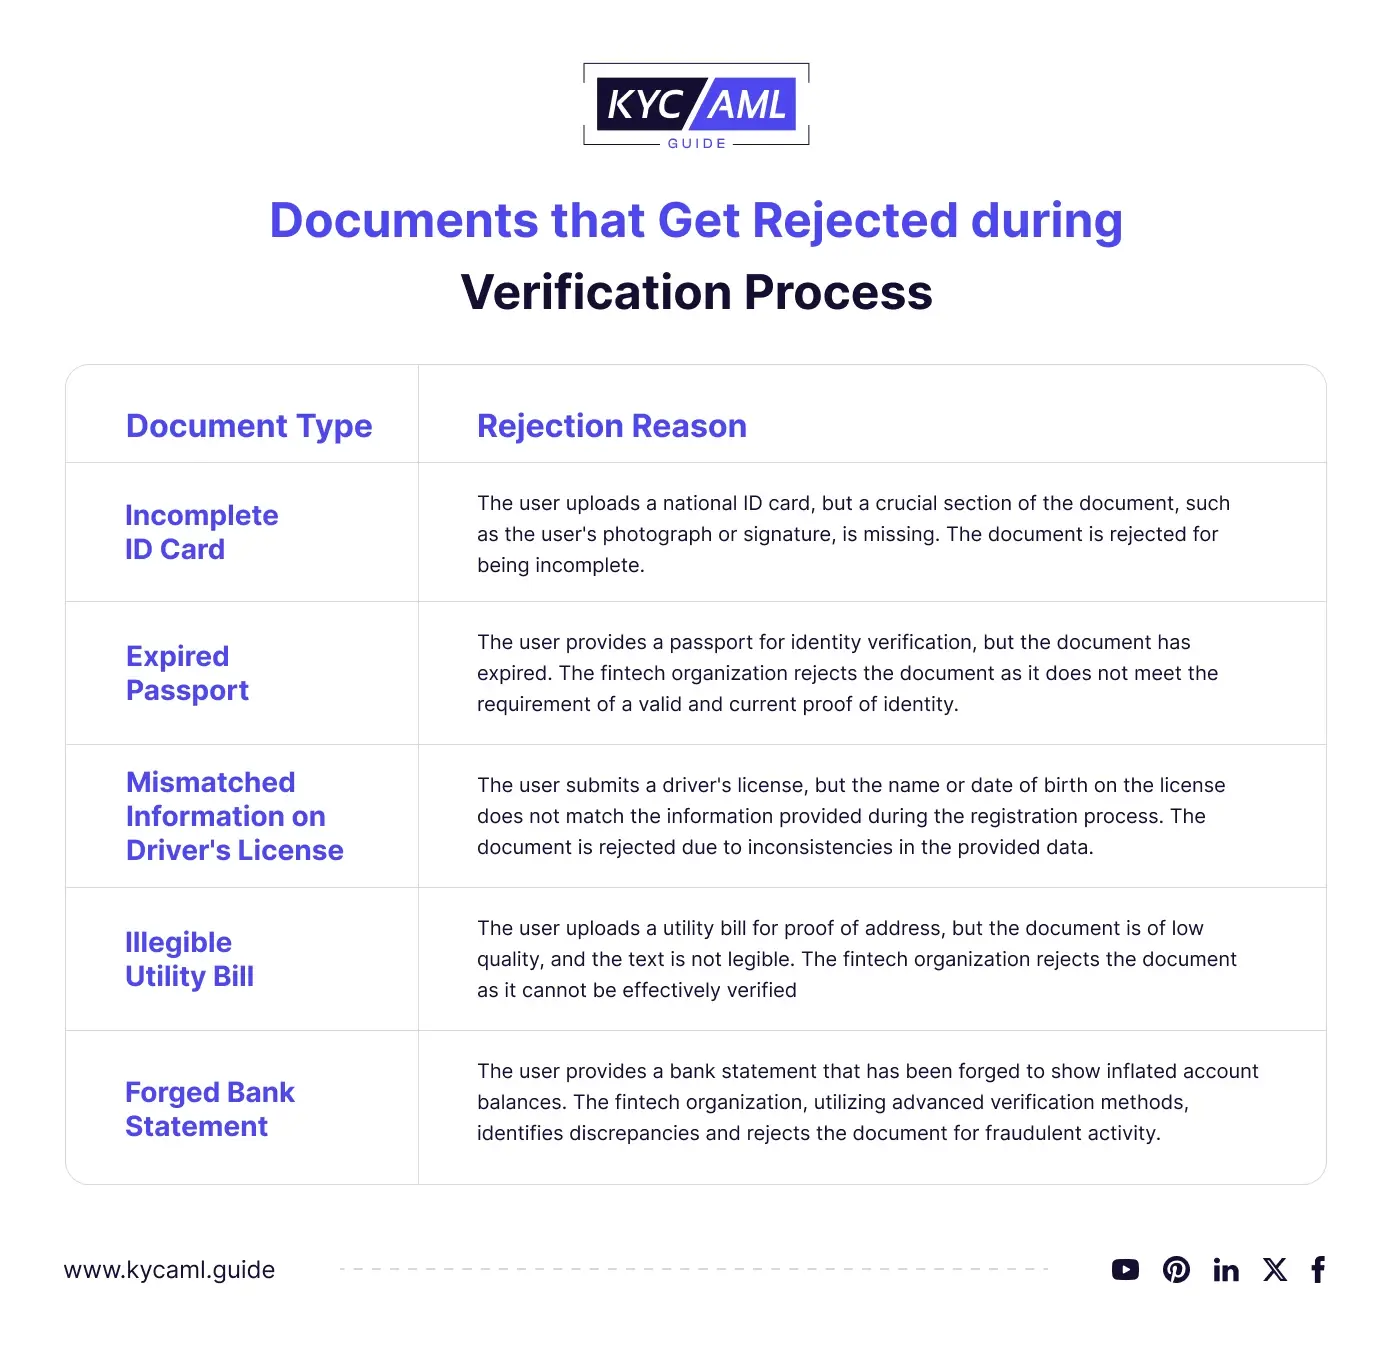 Documents that gets rejected during Verification Process